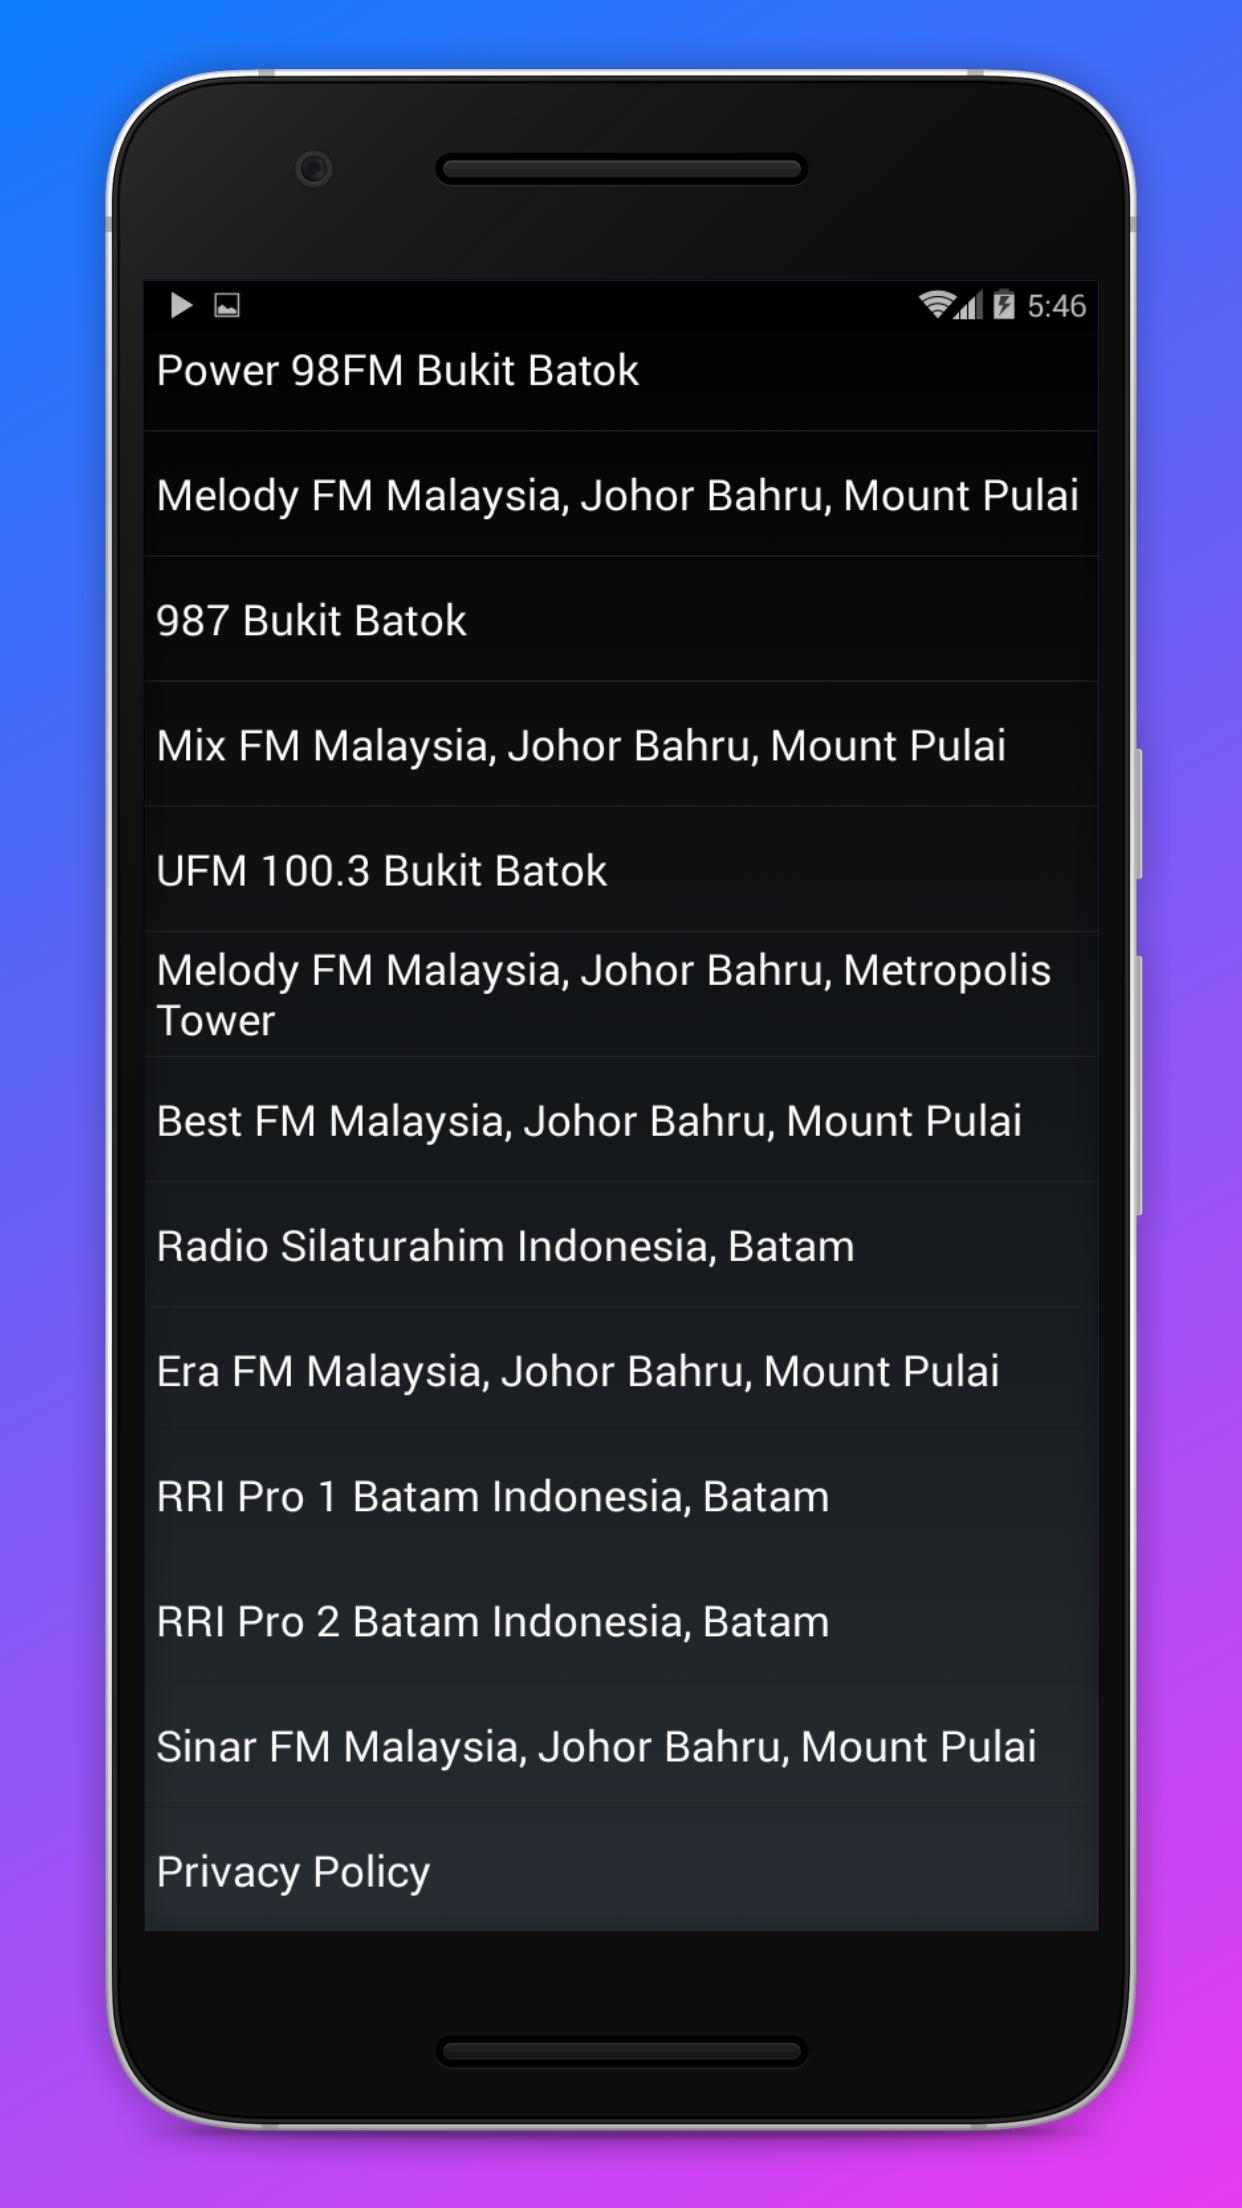 Radio Singapore: FM Radio All stations 2019 for Android - APK Download